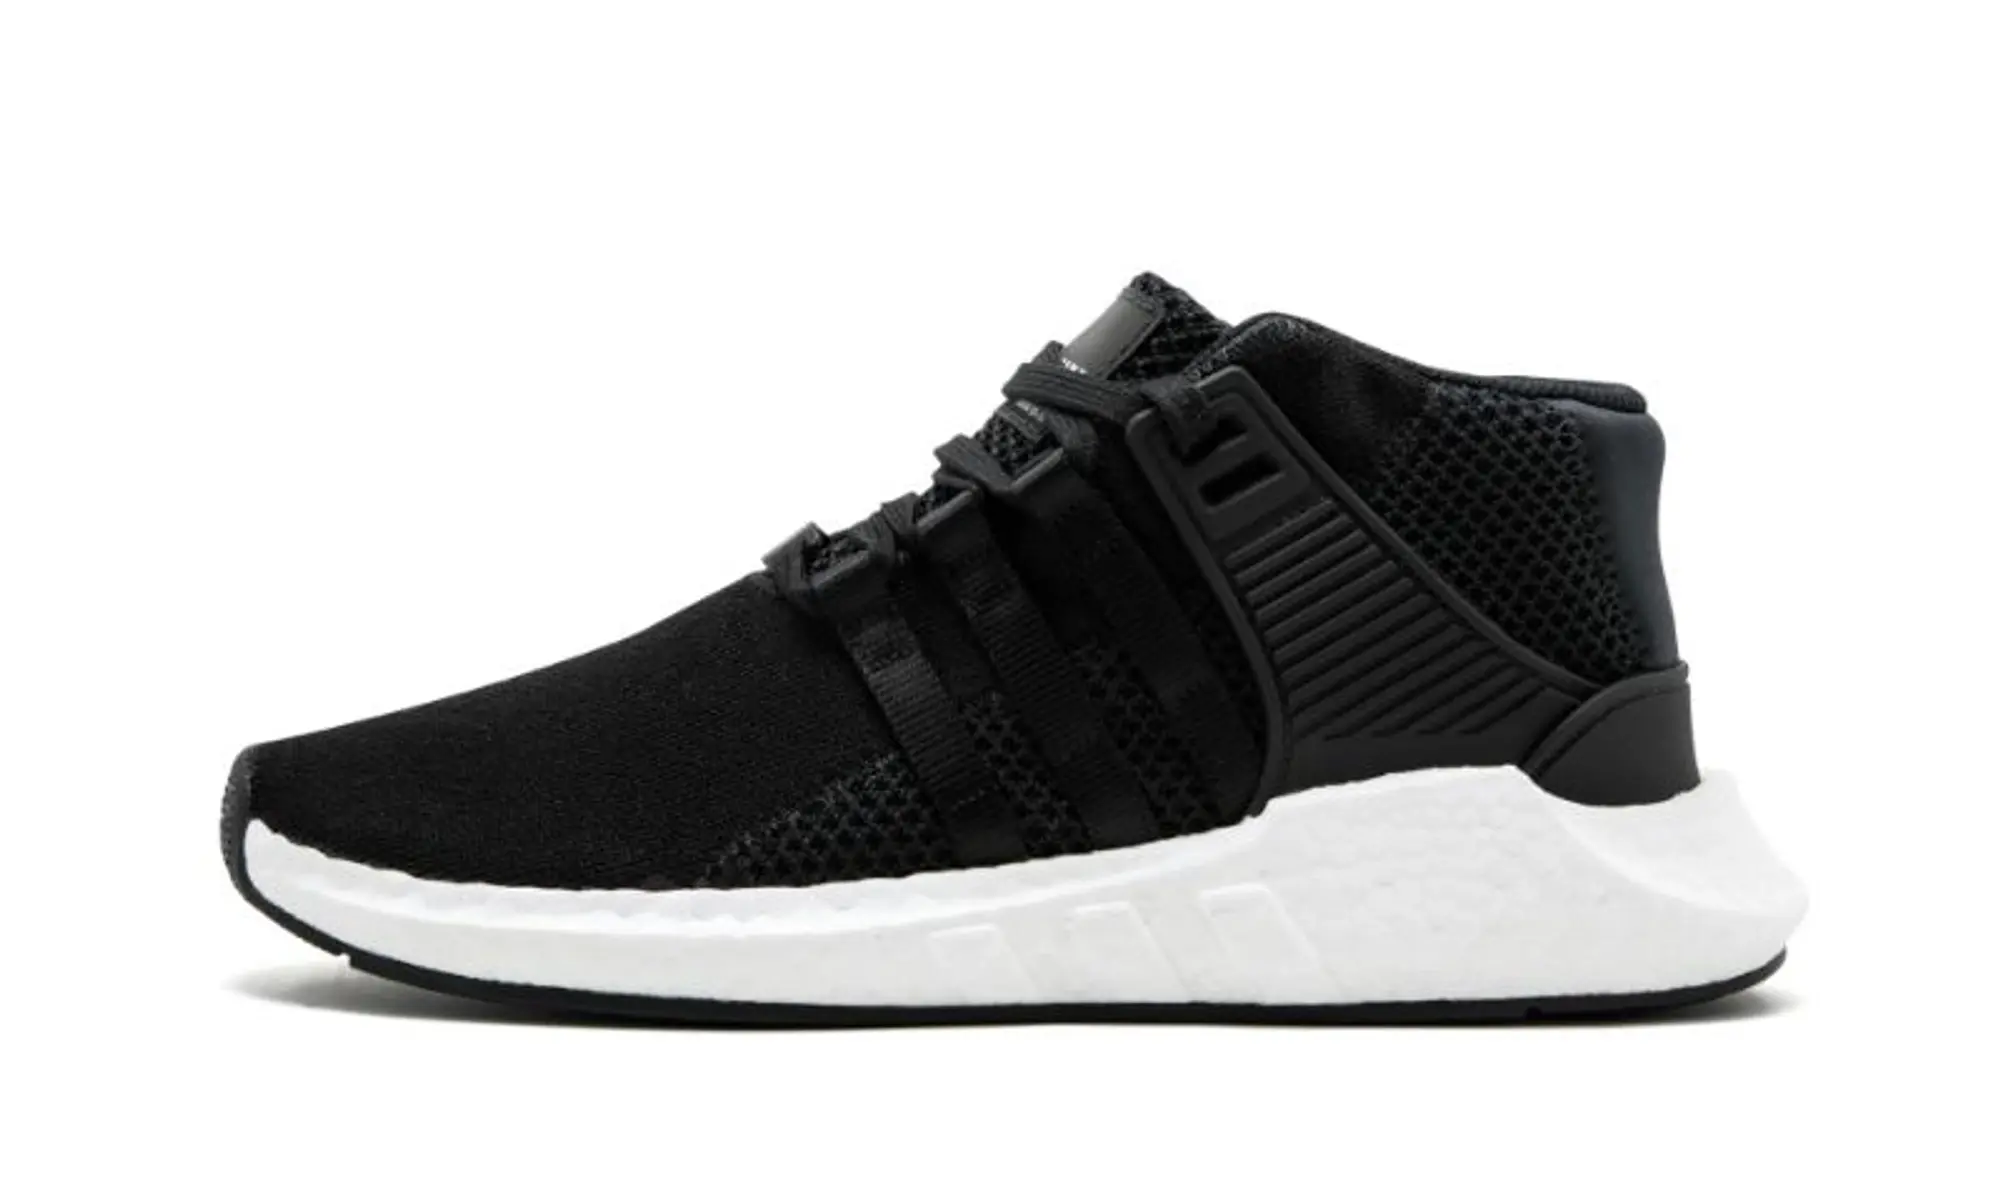 adidas EQT Support MID MMW Shoes